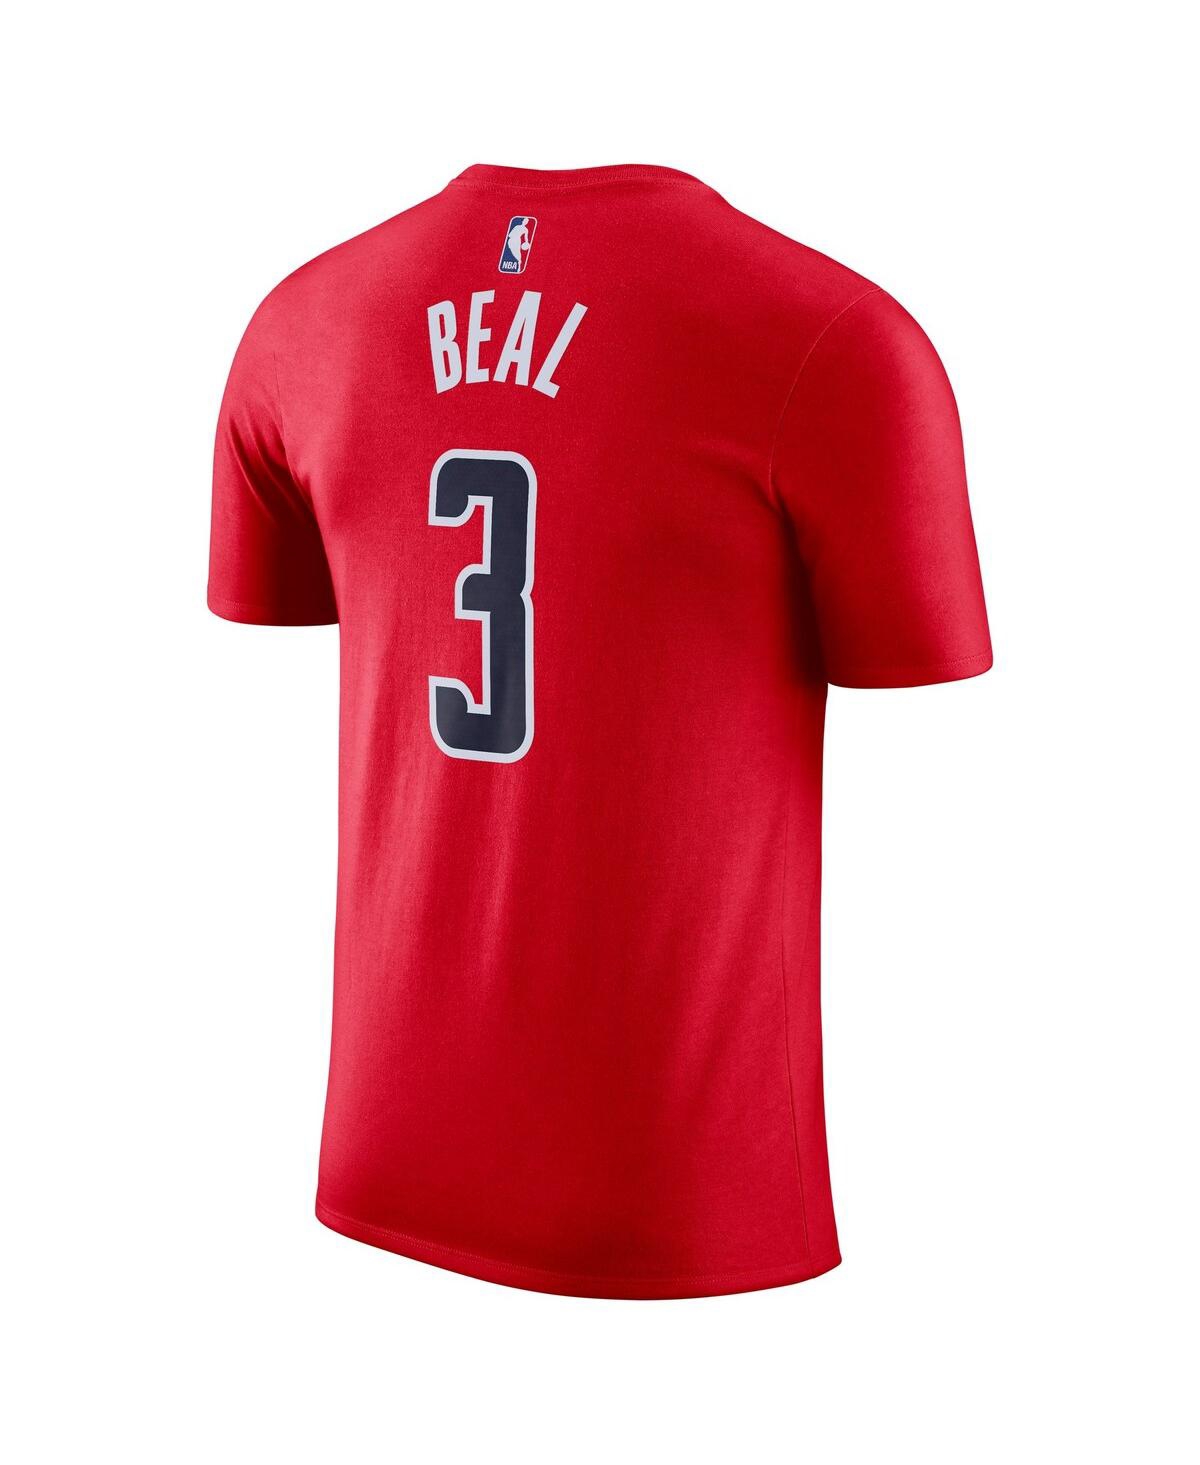 Shop Nike Men's  Bradley Beal Red Washington Wizards Icon 2022/23 Name And Number T-shirt